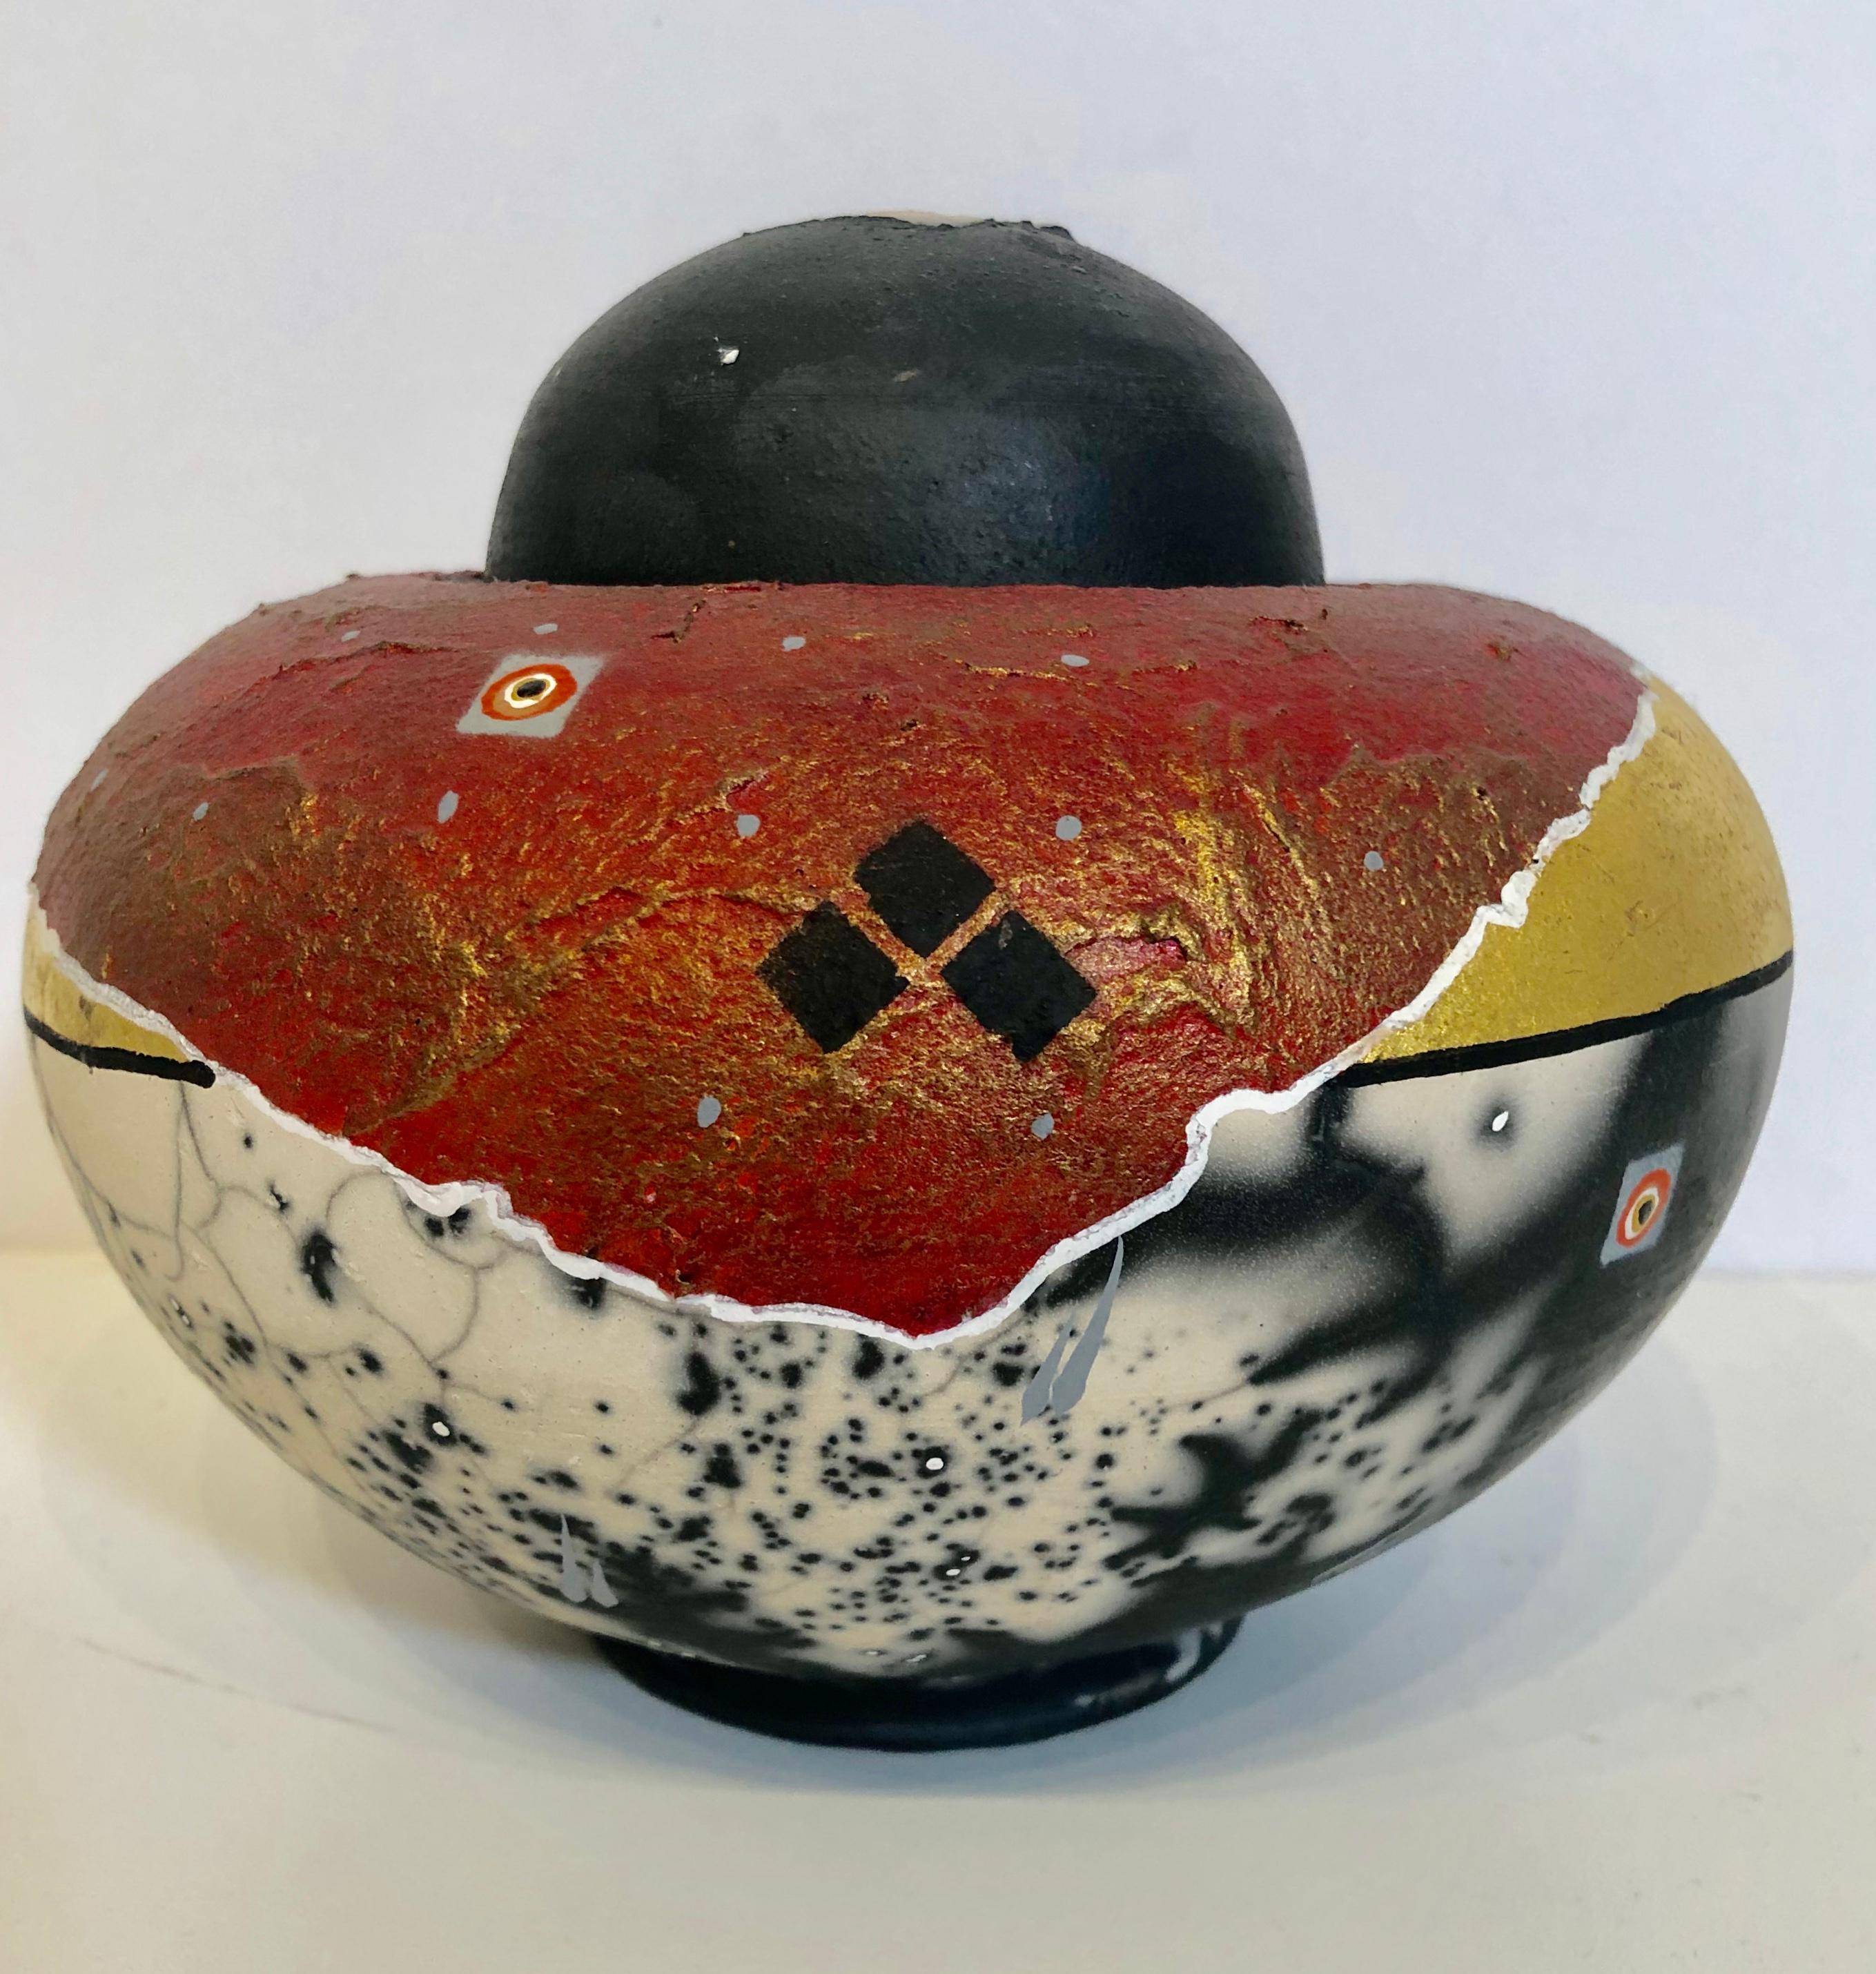  Raku Pottery Bowl with Cover - Sculpture by Robert Carlson 